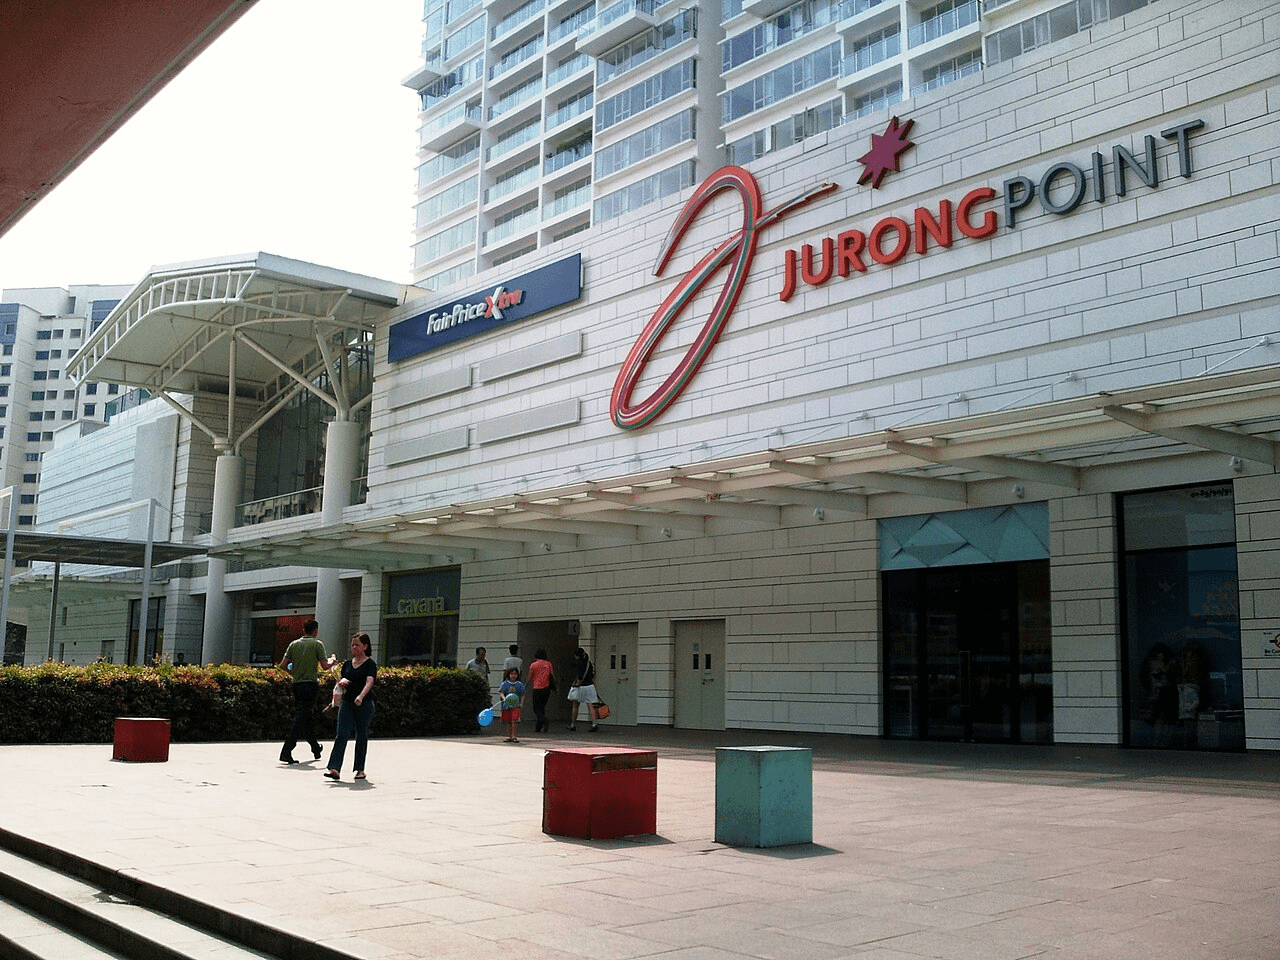 Jurong Point current exterior - heartland malls in Singapore